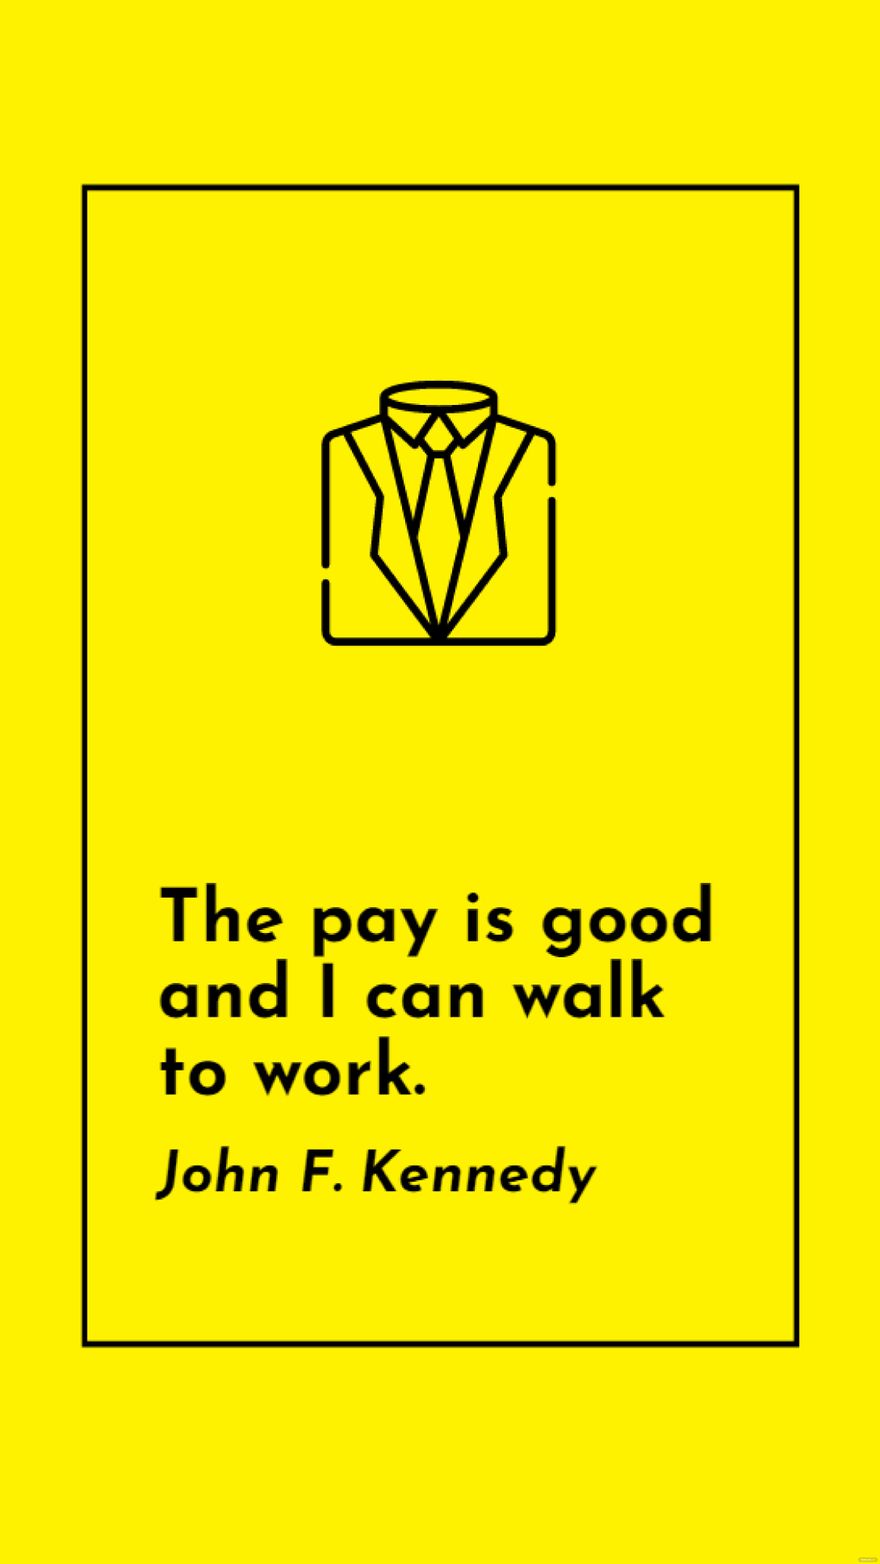 Free John F. Kennedy - The pay is good and I can walk to work.